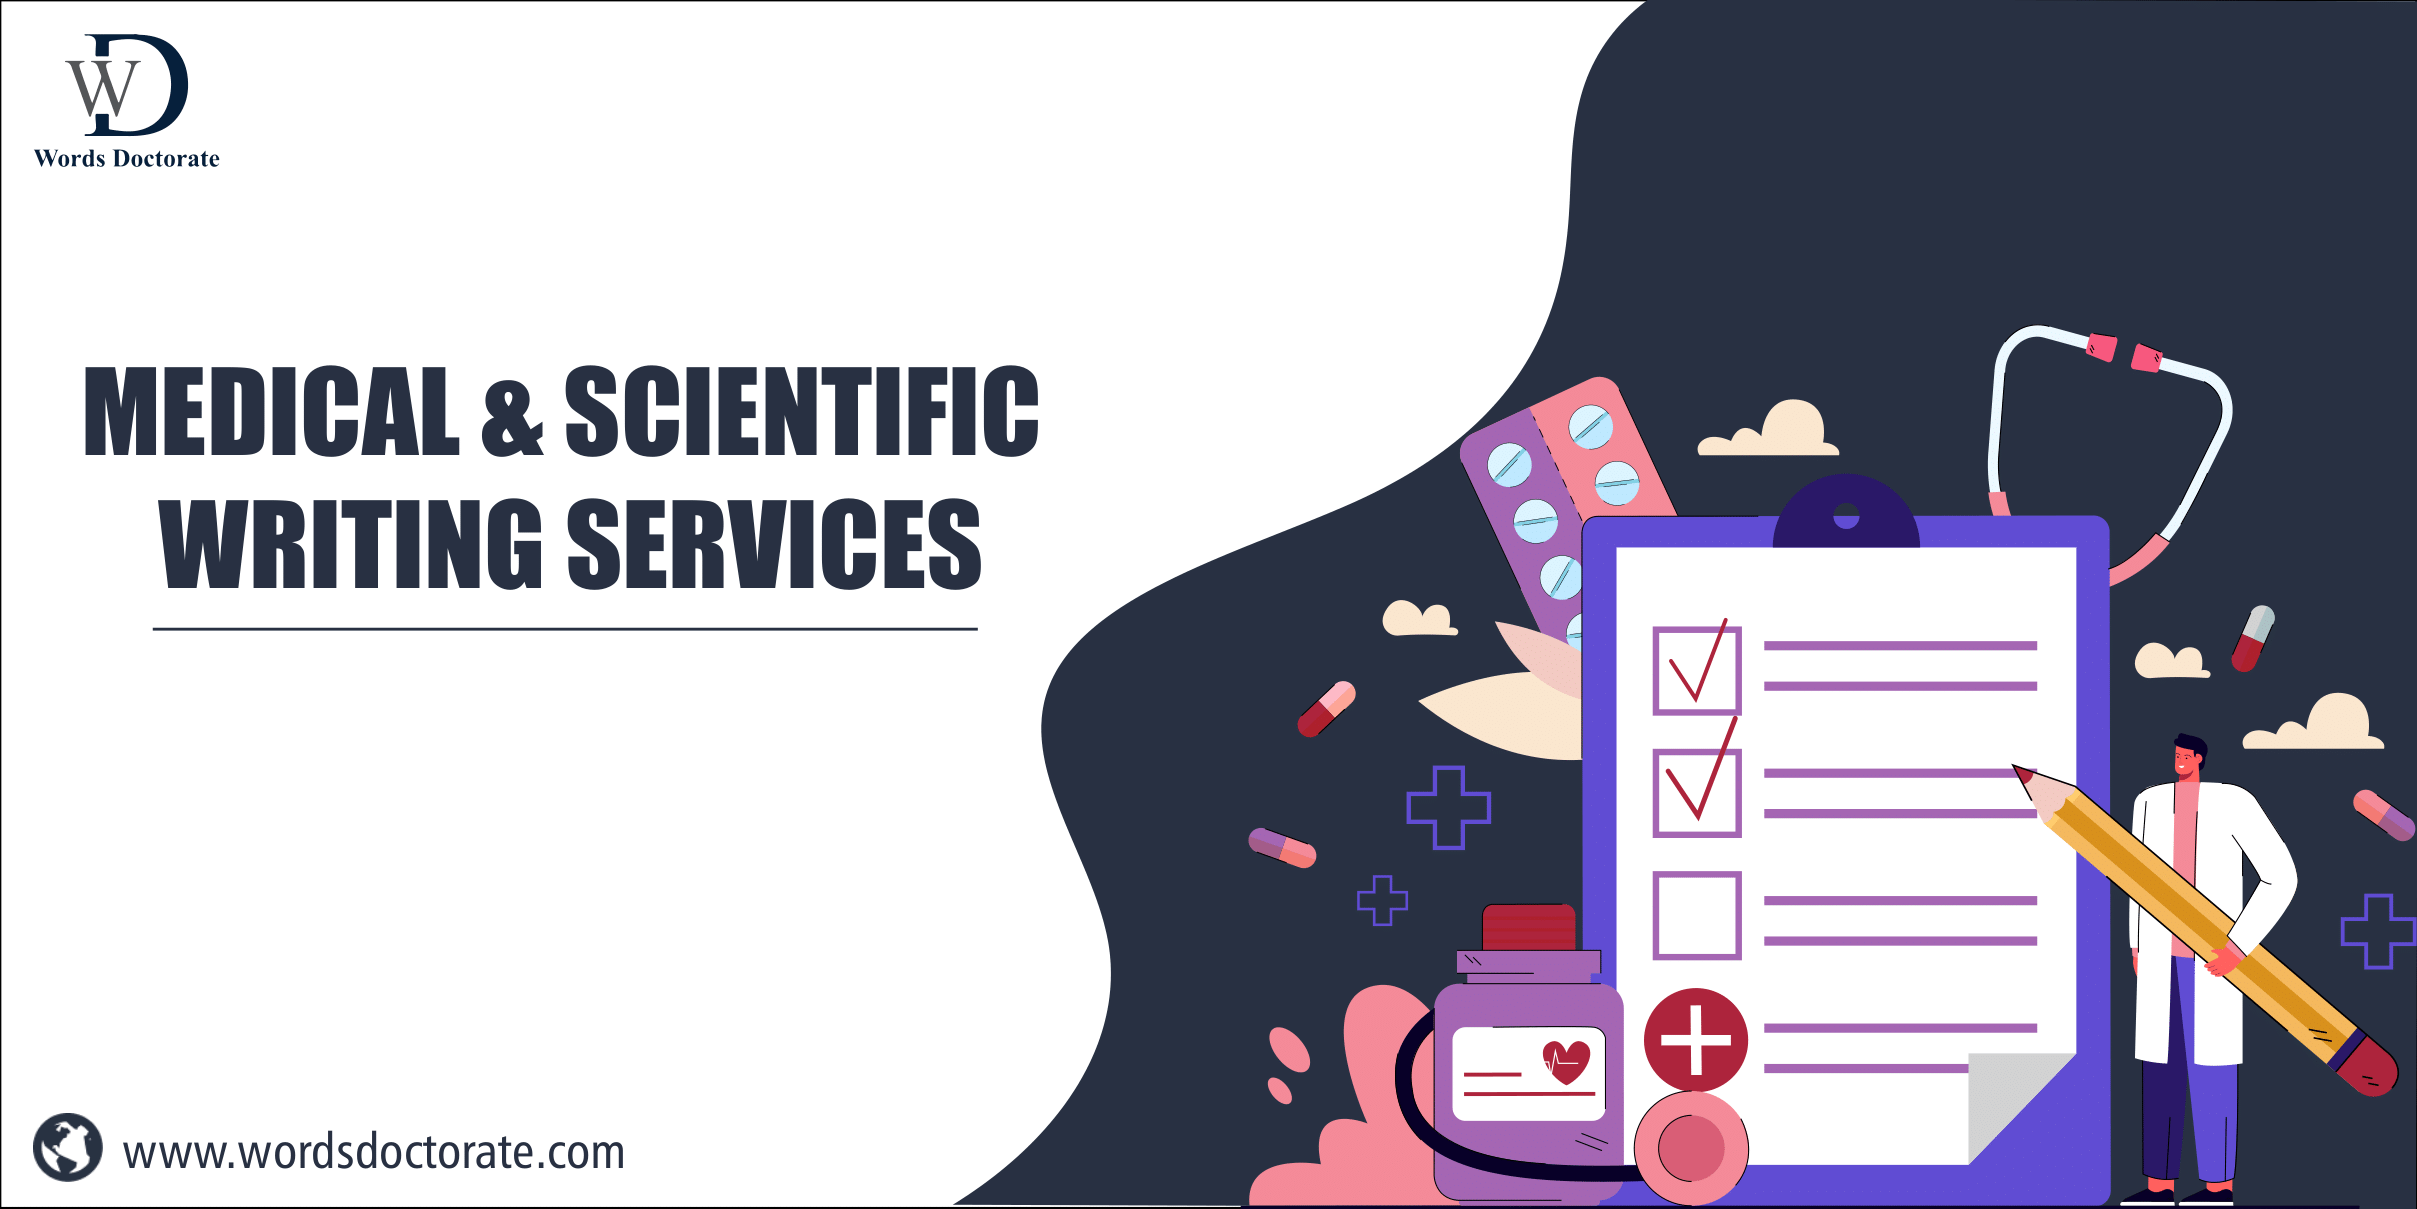 Medical & Scientific Writing Services